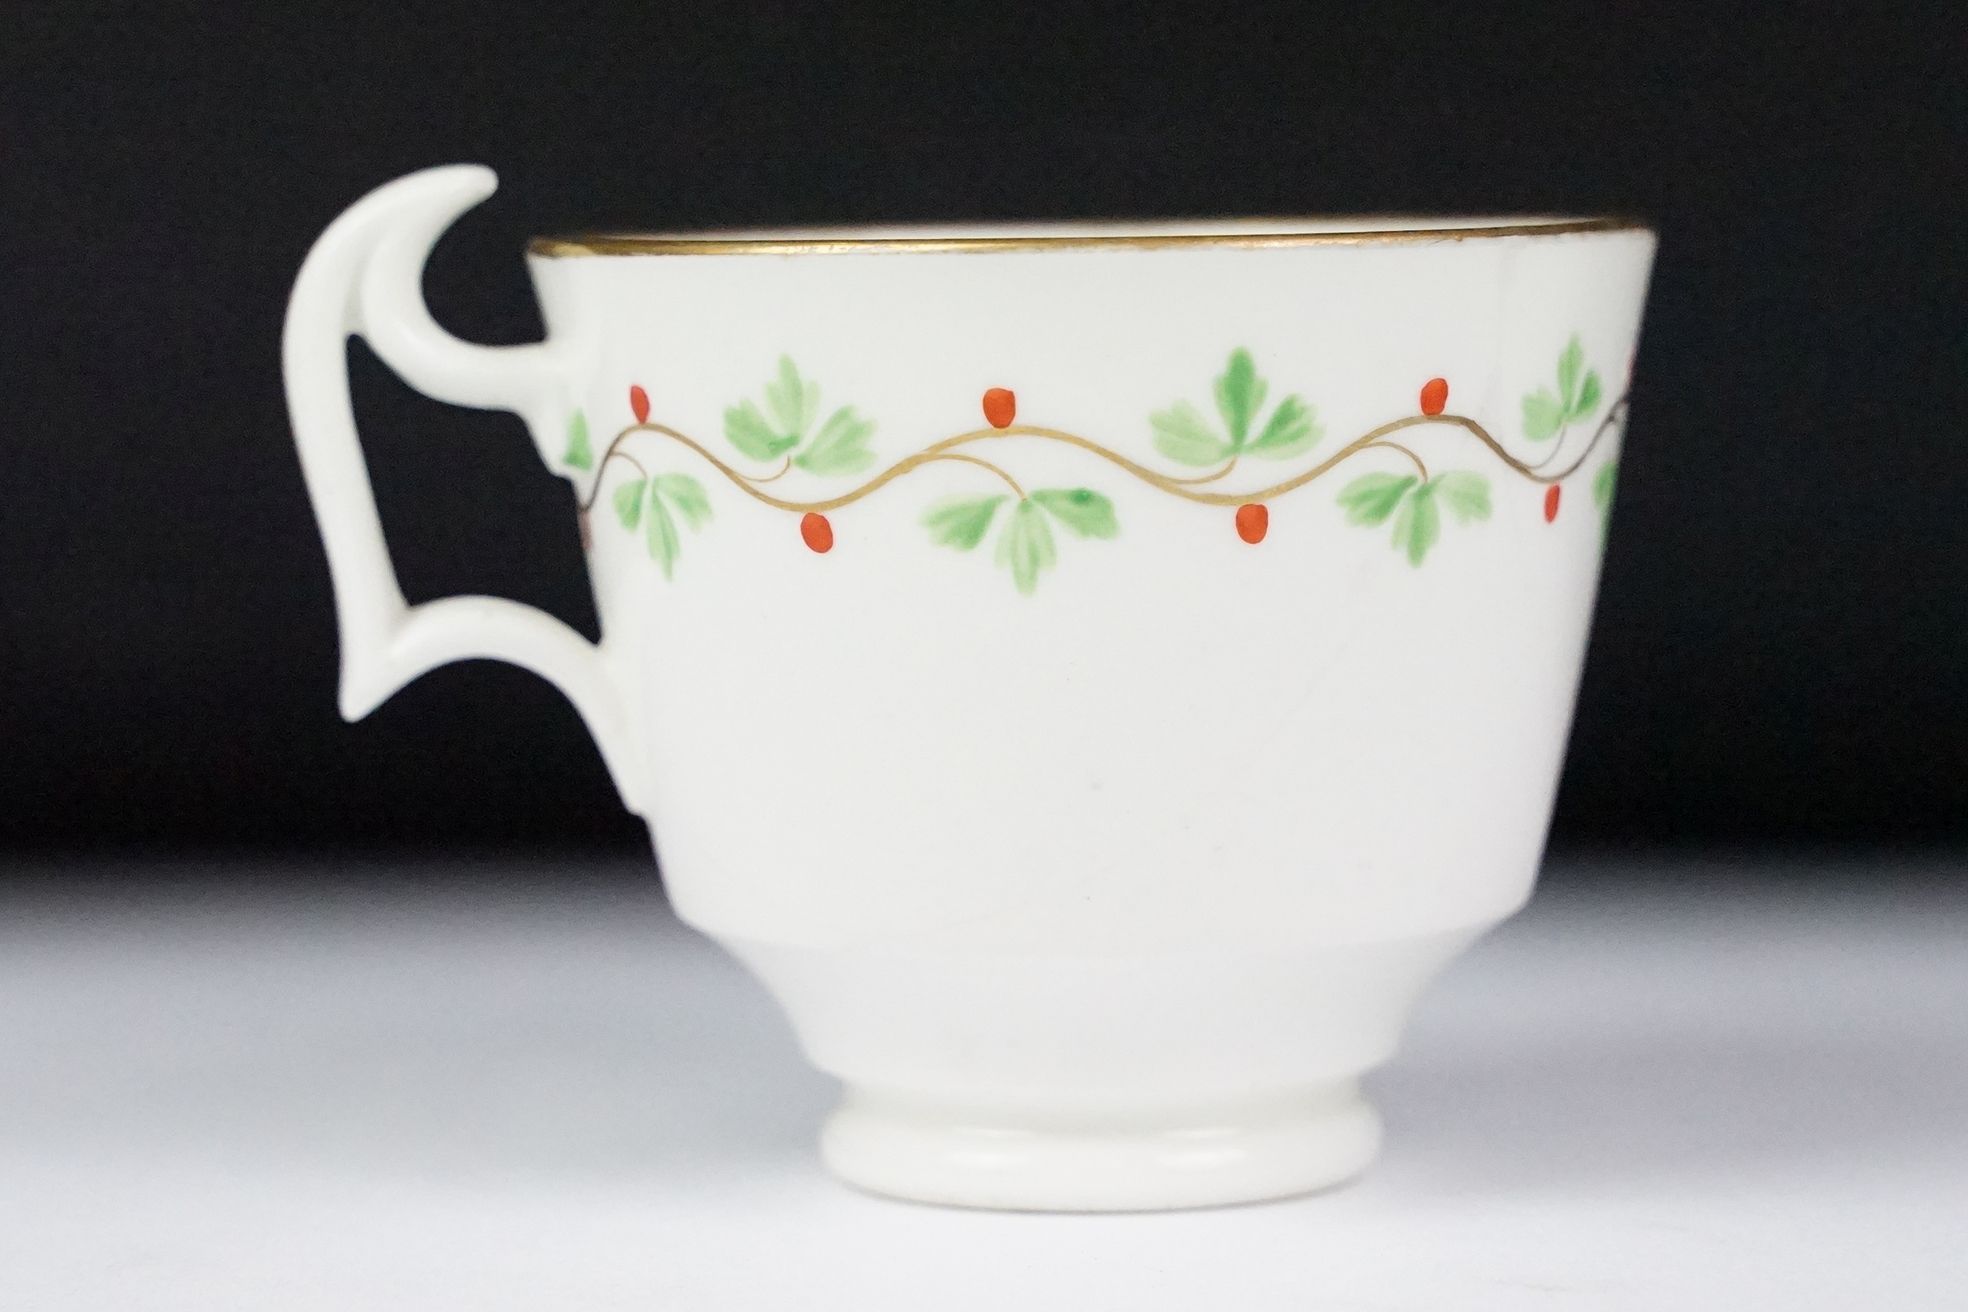 Swansea pottery cup and saucer, hand painted with a floral garland, the saucer, 13.5cm diameter - Image 3 of 7